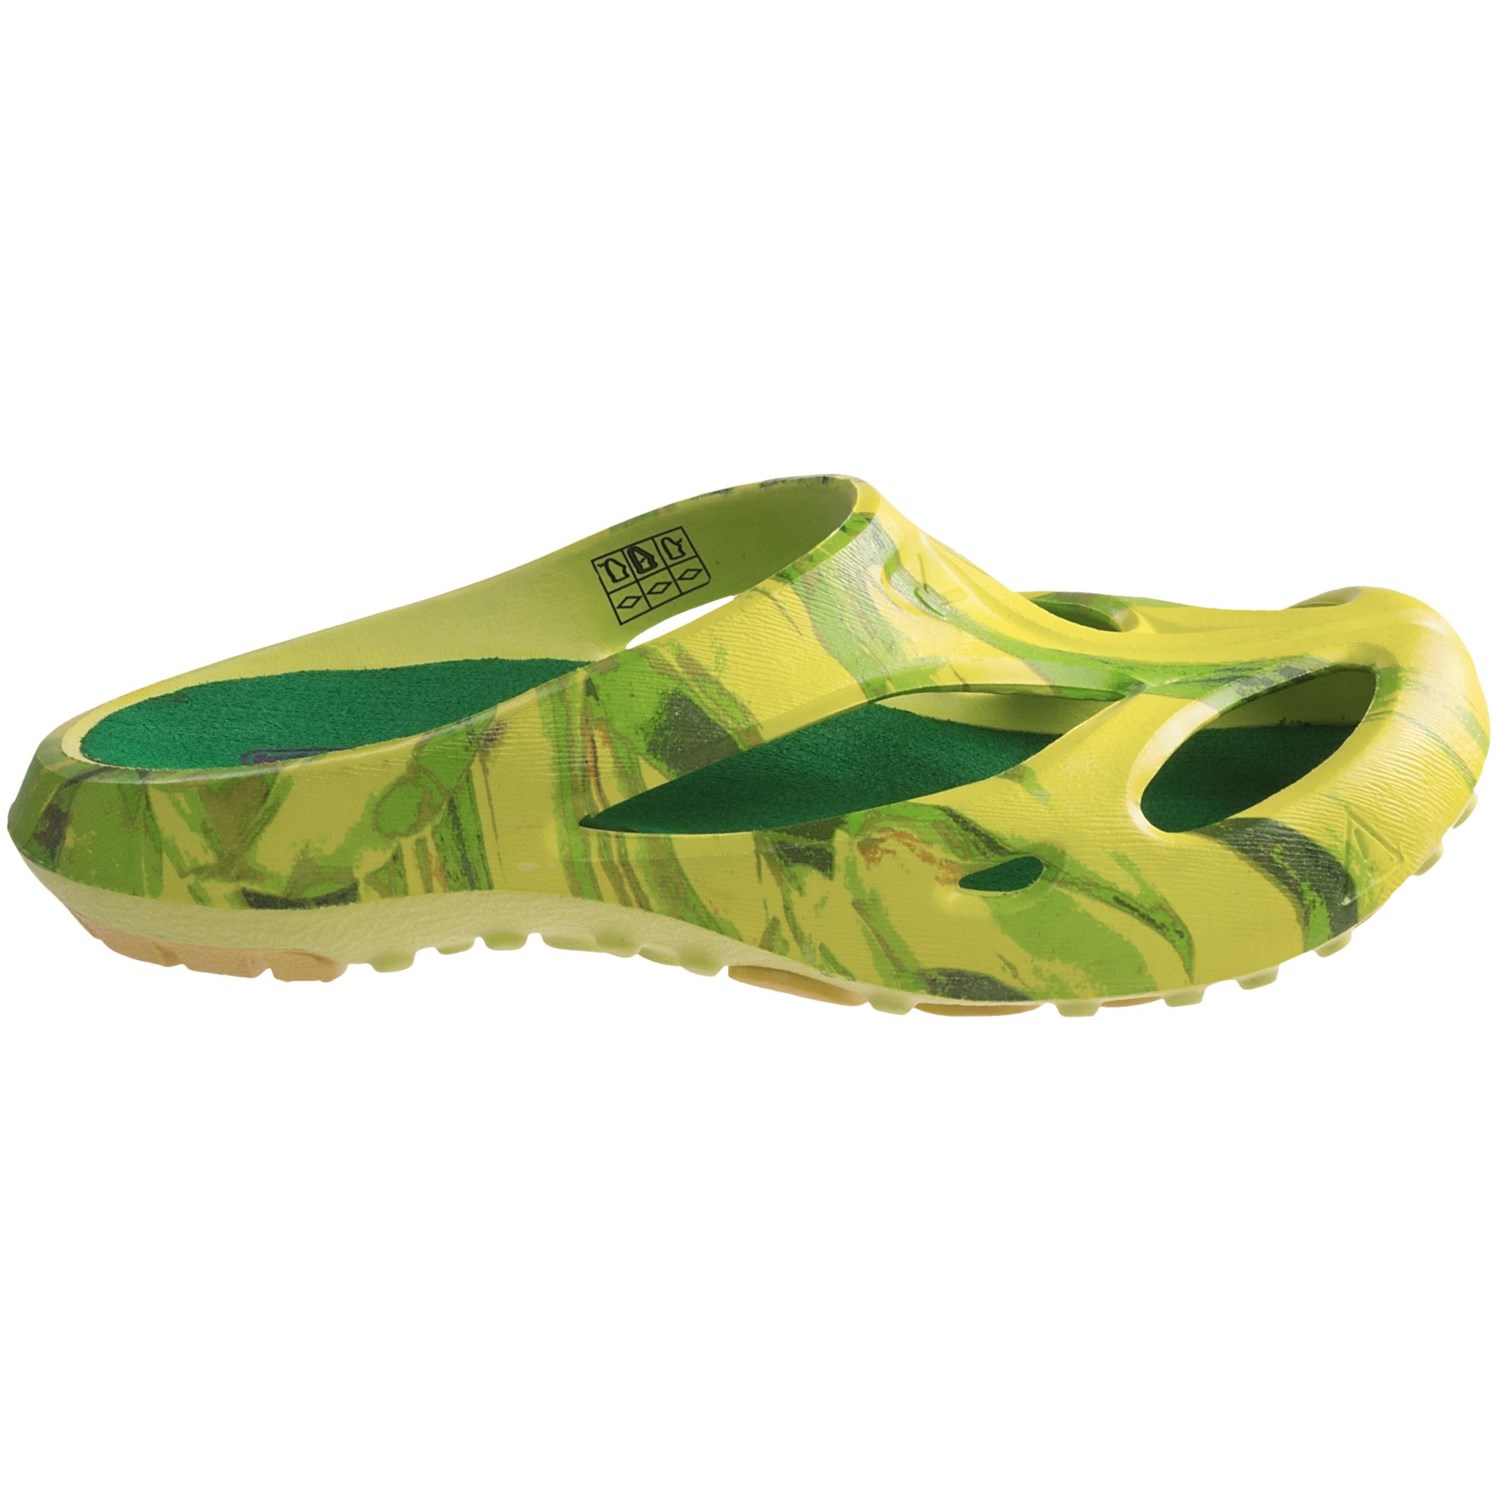 Keen Shanti Arts Sandals (For Women) 6297Y - Save 40%